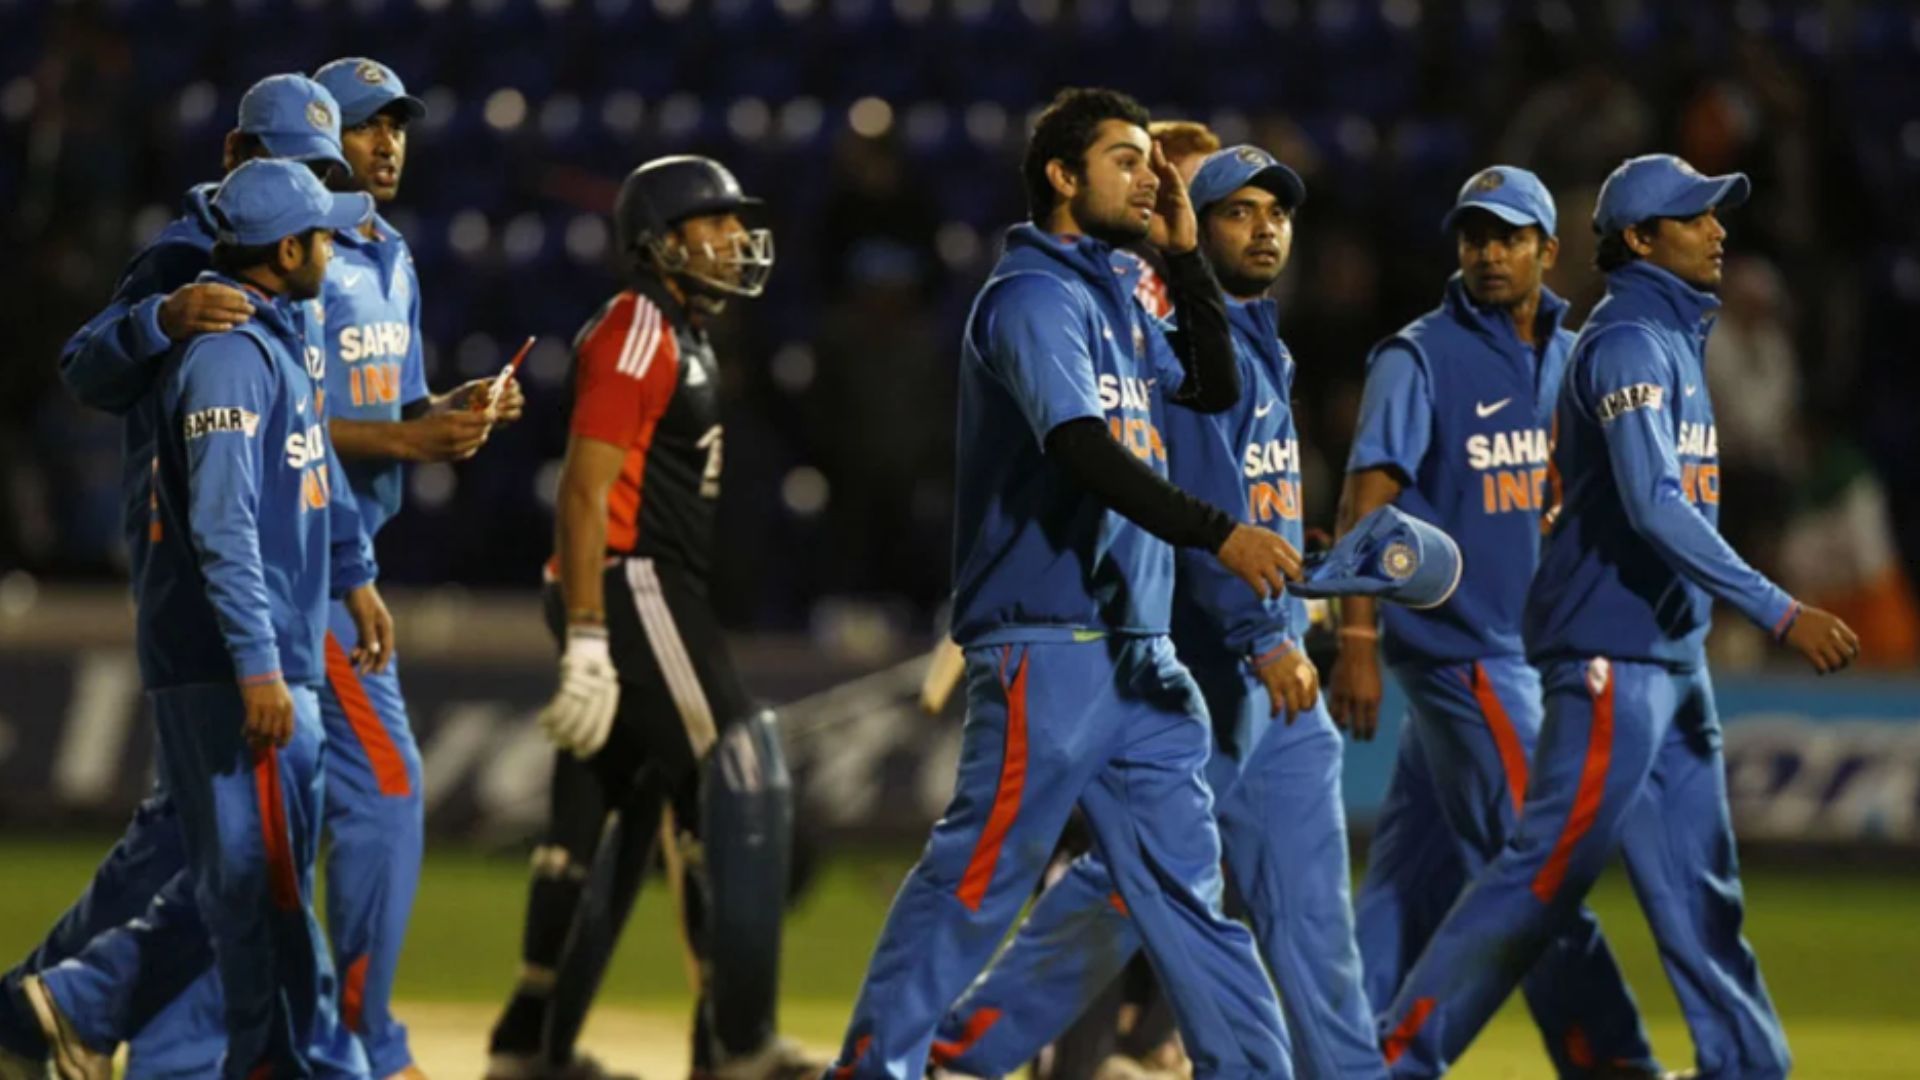 Team India trudge off the field after losing the 5th ODI against England in 2011. (Pic: AP) 